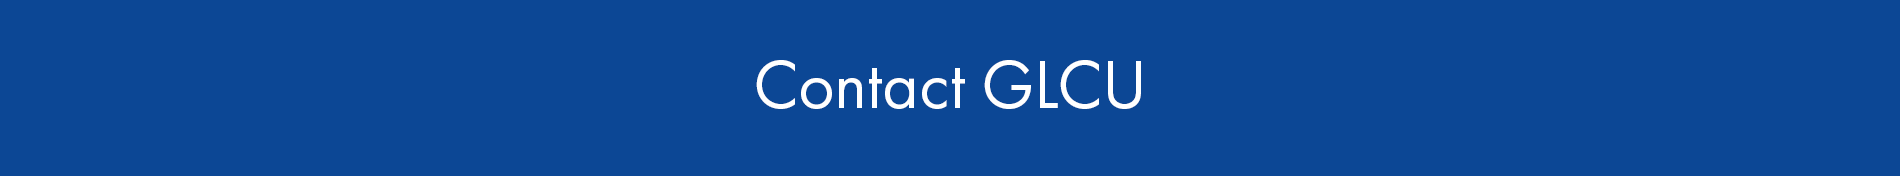 A blue banner depicting contacting GLCU